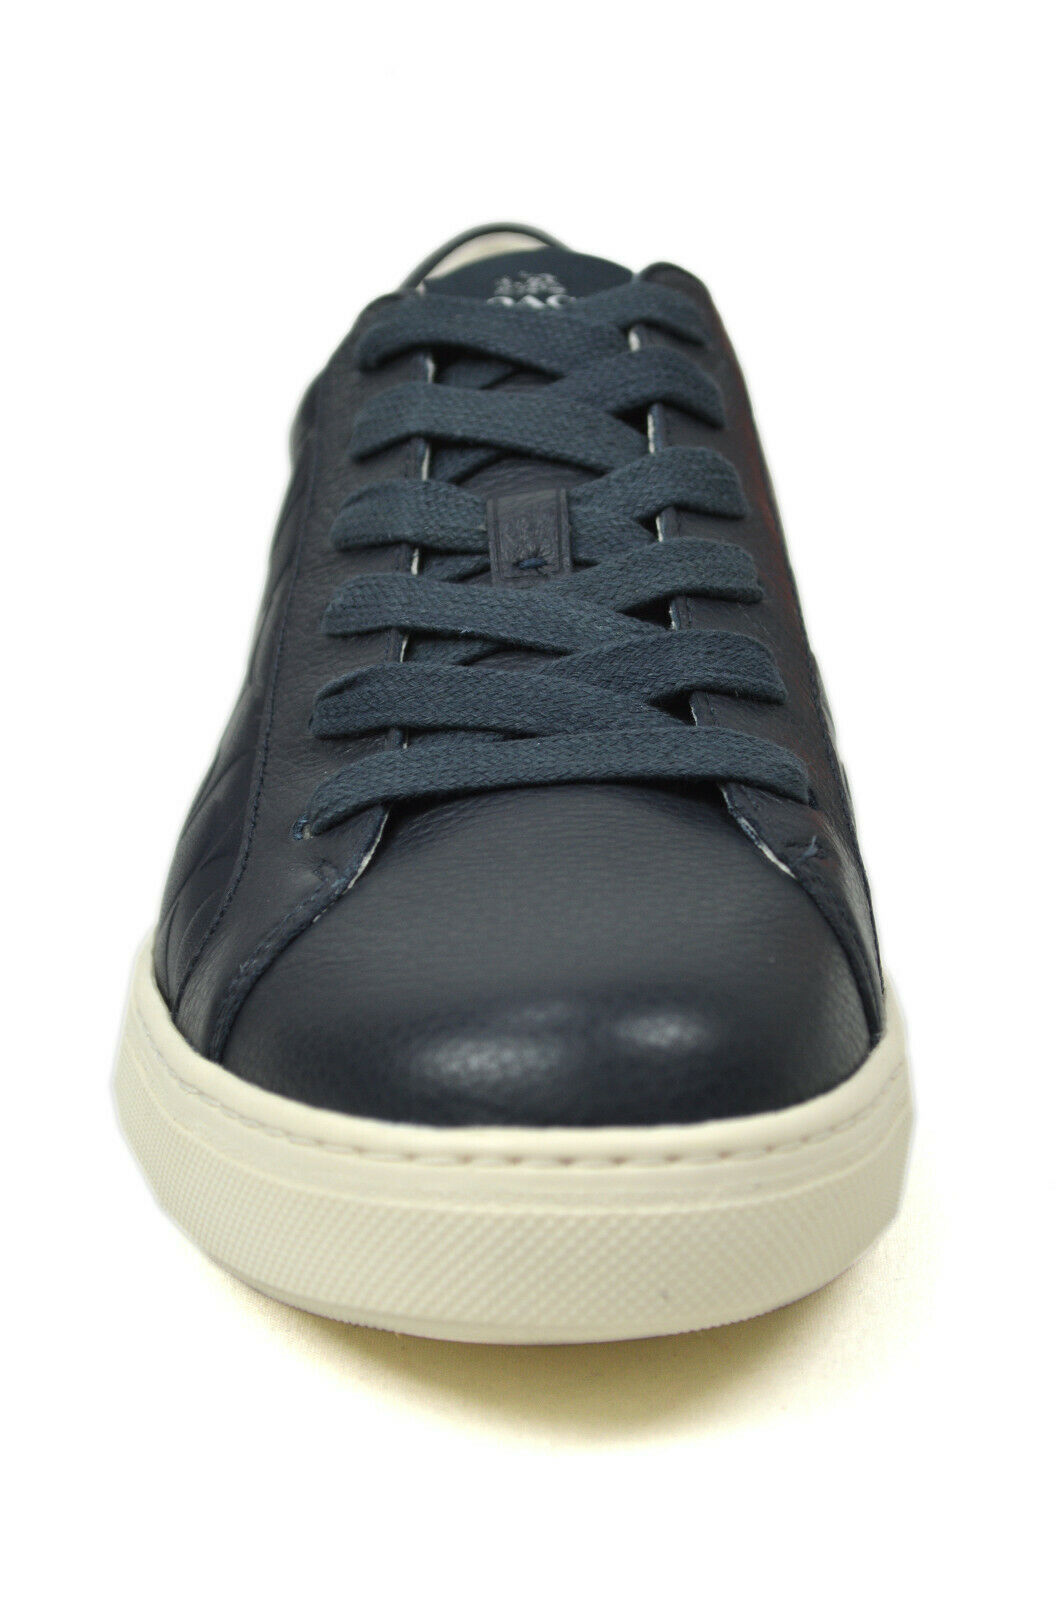 New  Coach Mens C126 Navy Blue Signature Leather Low Top Sneakers Sz 9.5 D 8994-3 - image 3 of 4